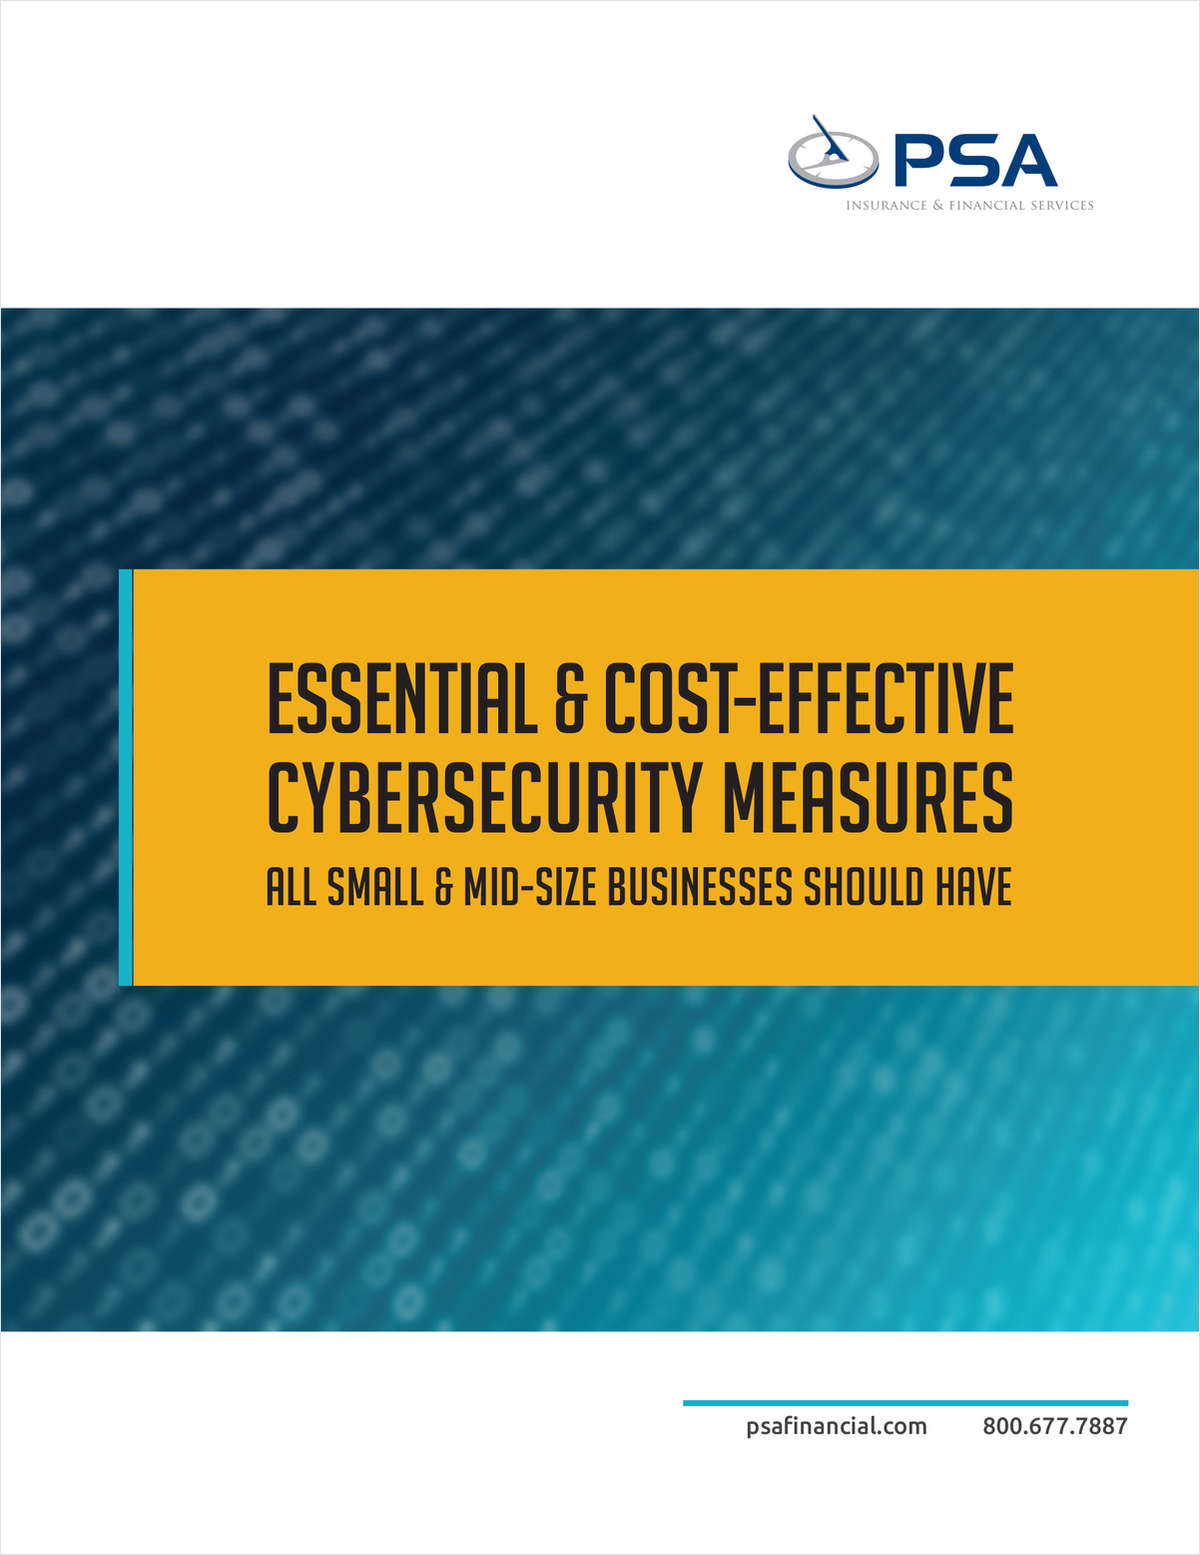 Essential and Cost-effective Cybersecurity Measures All Small and Mid-Size Businesses Should Have